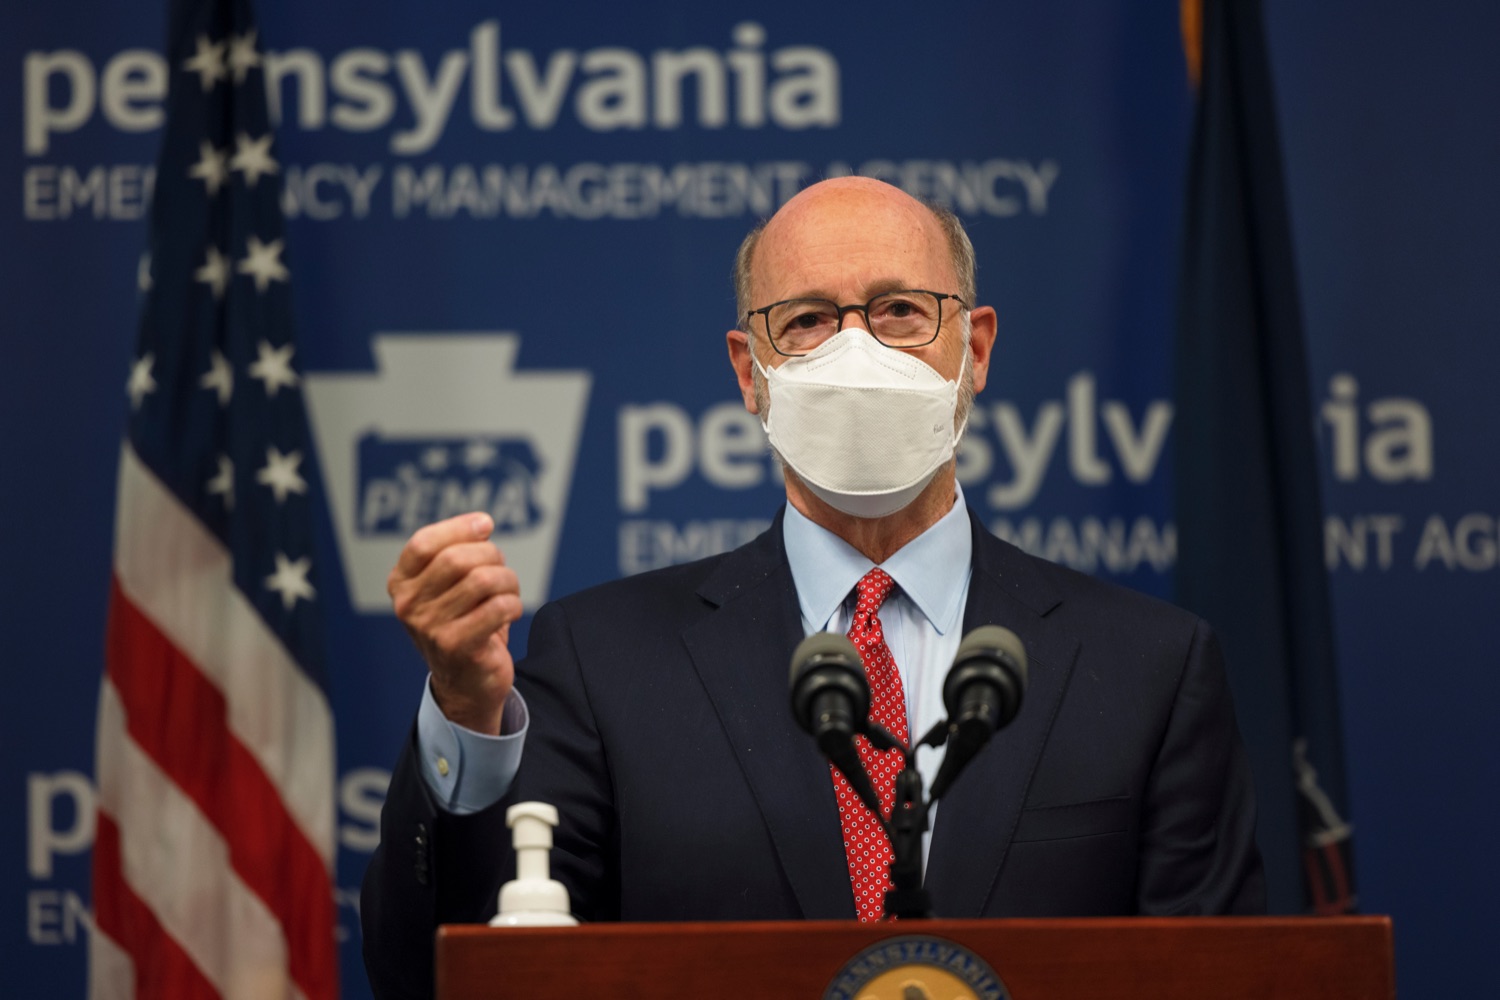 Governor Tom Wolf speaks during a press conference, which discussed the current state of COVID-19 and a new Secretary of Health order requiring masks to be worn inside K-12 school buildings, early learning programs and child care providers, inside Pennsylvania Emergency Management Agency in Harrisburg on Tuesday, August 31, 2021.<br><a href="https://filesource.amperwave.net/commonwealthofpa/photo/19089_GOV_School_Masking_NK_013.jpg" target="_blank">⇣ Download Photo</a>